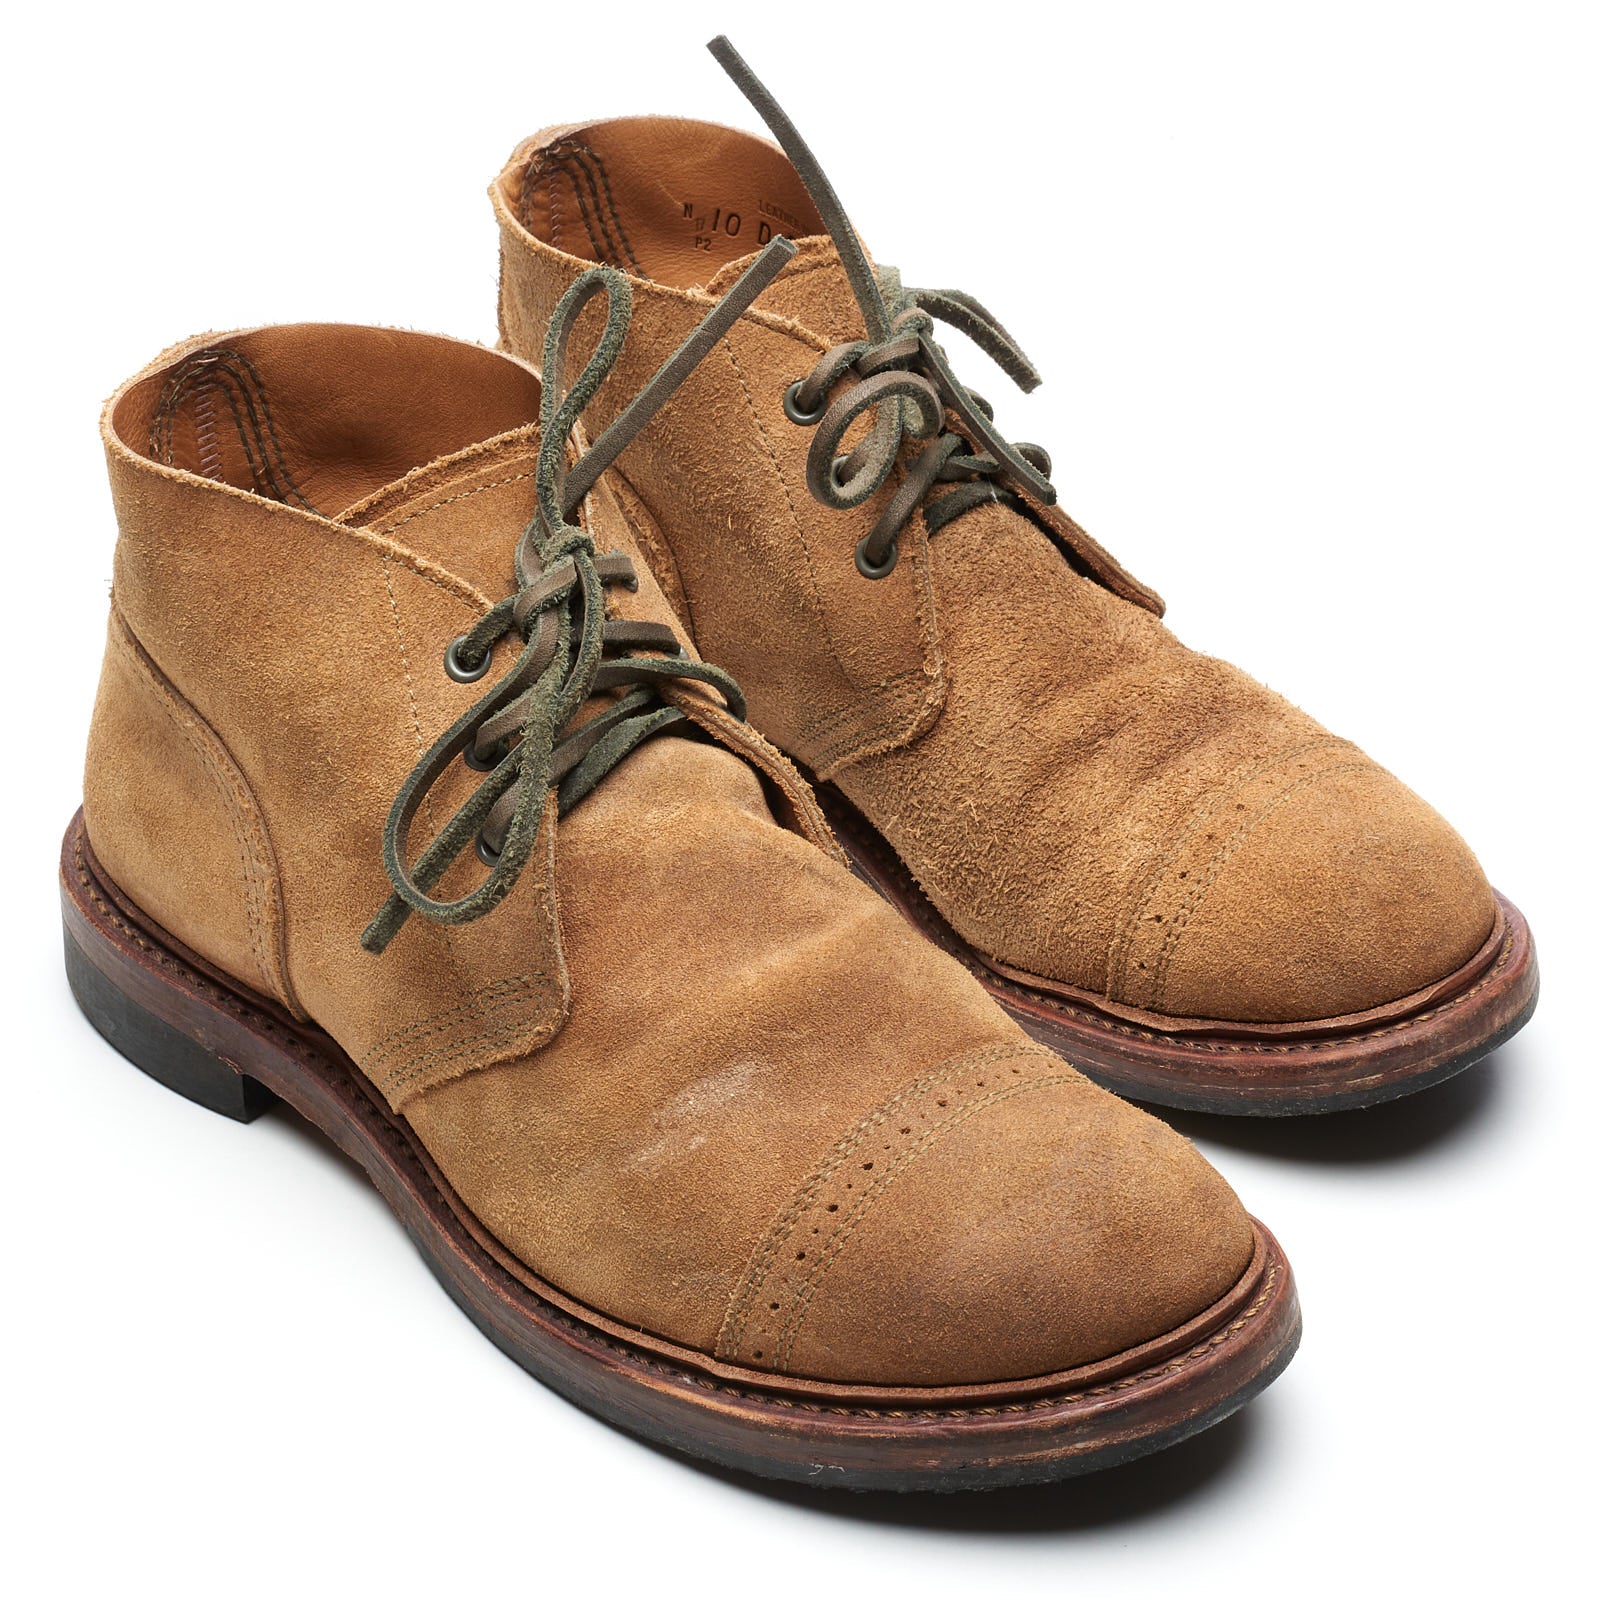 RED WING X NIGEL CABOURN 4632 Heritage Chukka Boots US 10 D Munson Limited  Ed.